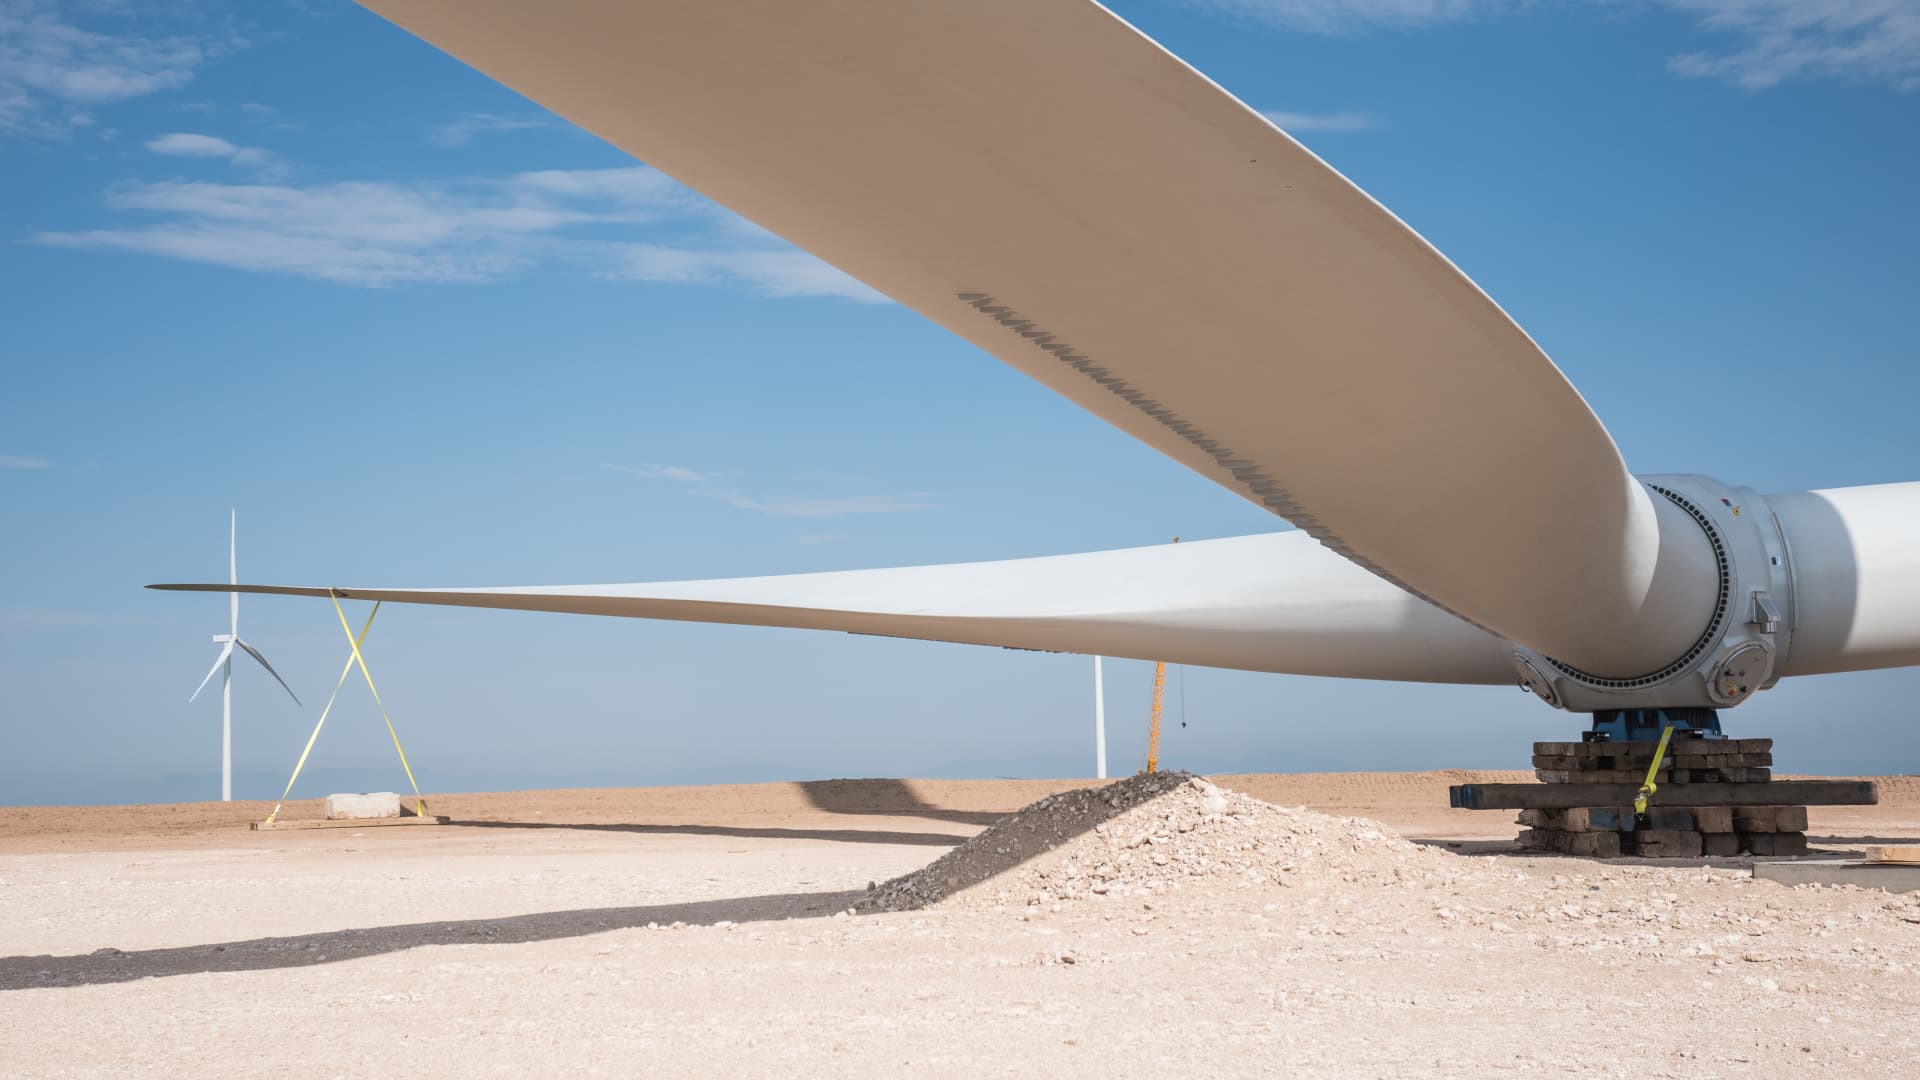 Rotor blades sit on the ground next to a wind turbine under construction at the Avangrid Renewables La Joya wind farm in Encino, New Mexico.